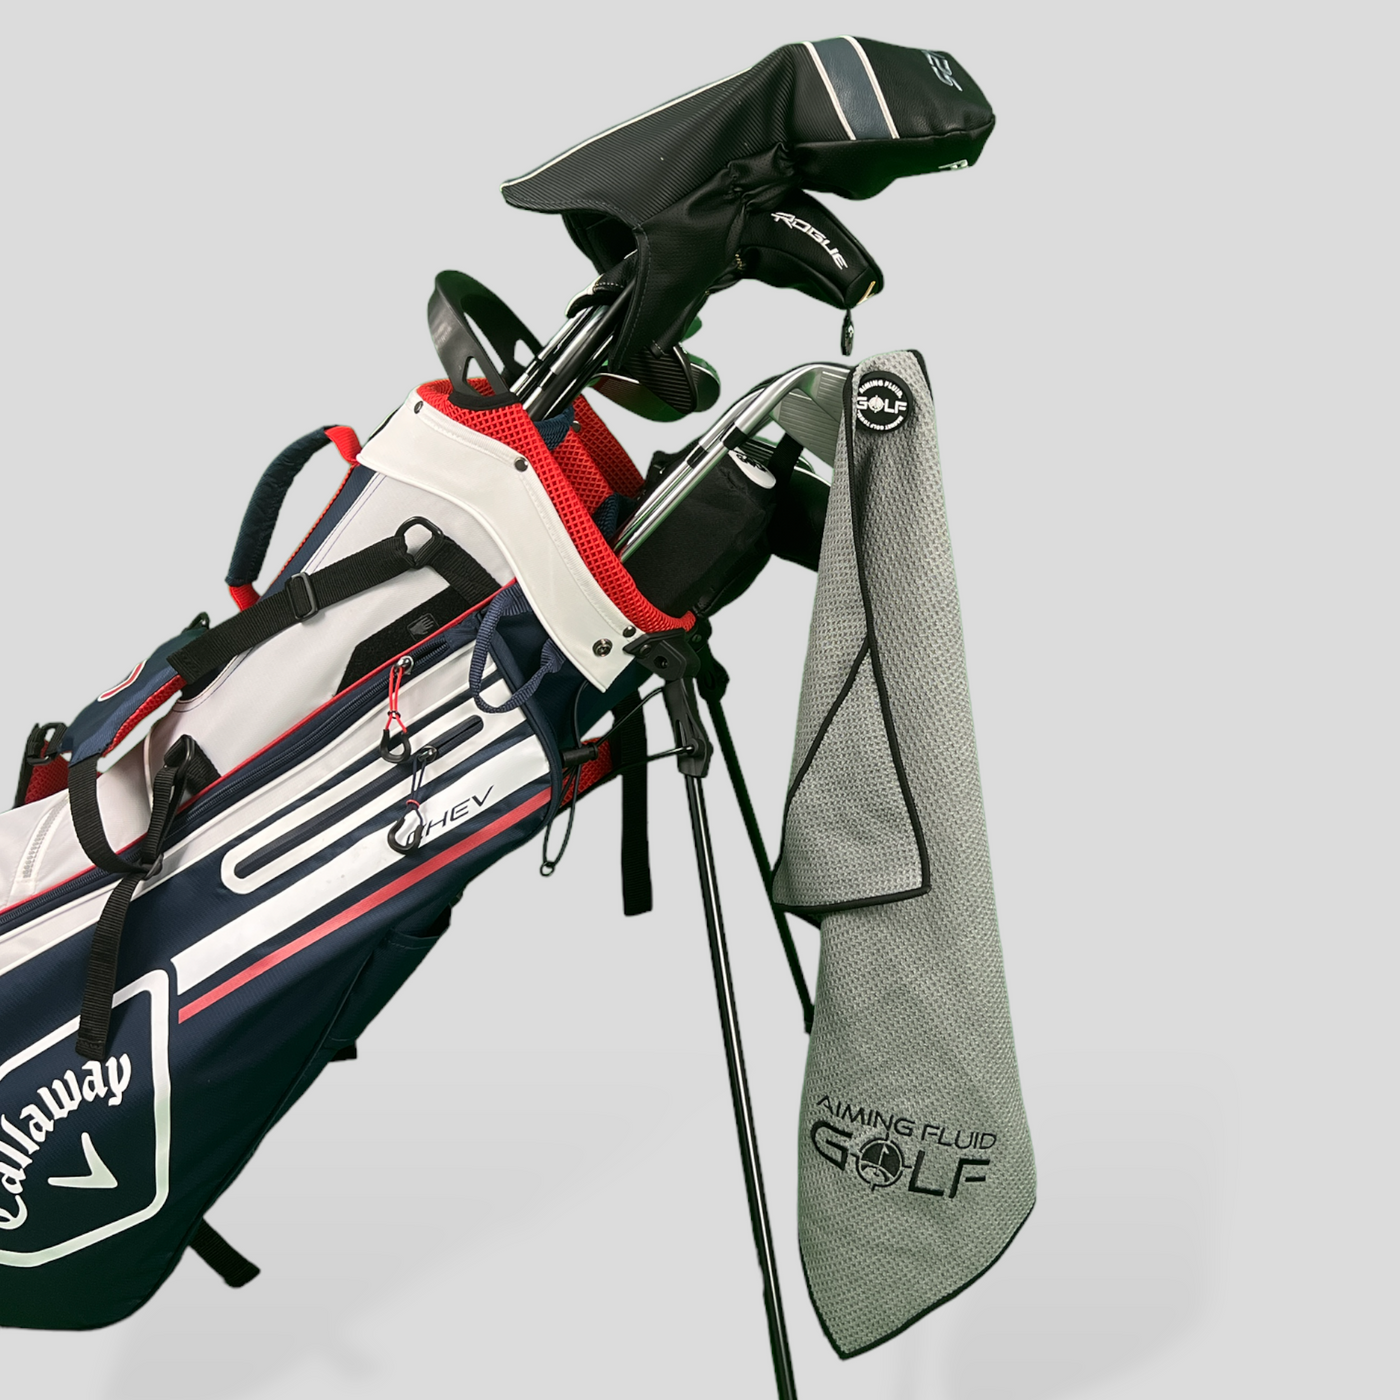 Aiming Fluid Golf (THE BEST TOWEL IN GOLF) Magnetic Towel Tall Boy (Large) in color grey on golf bag callaway